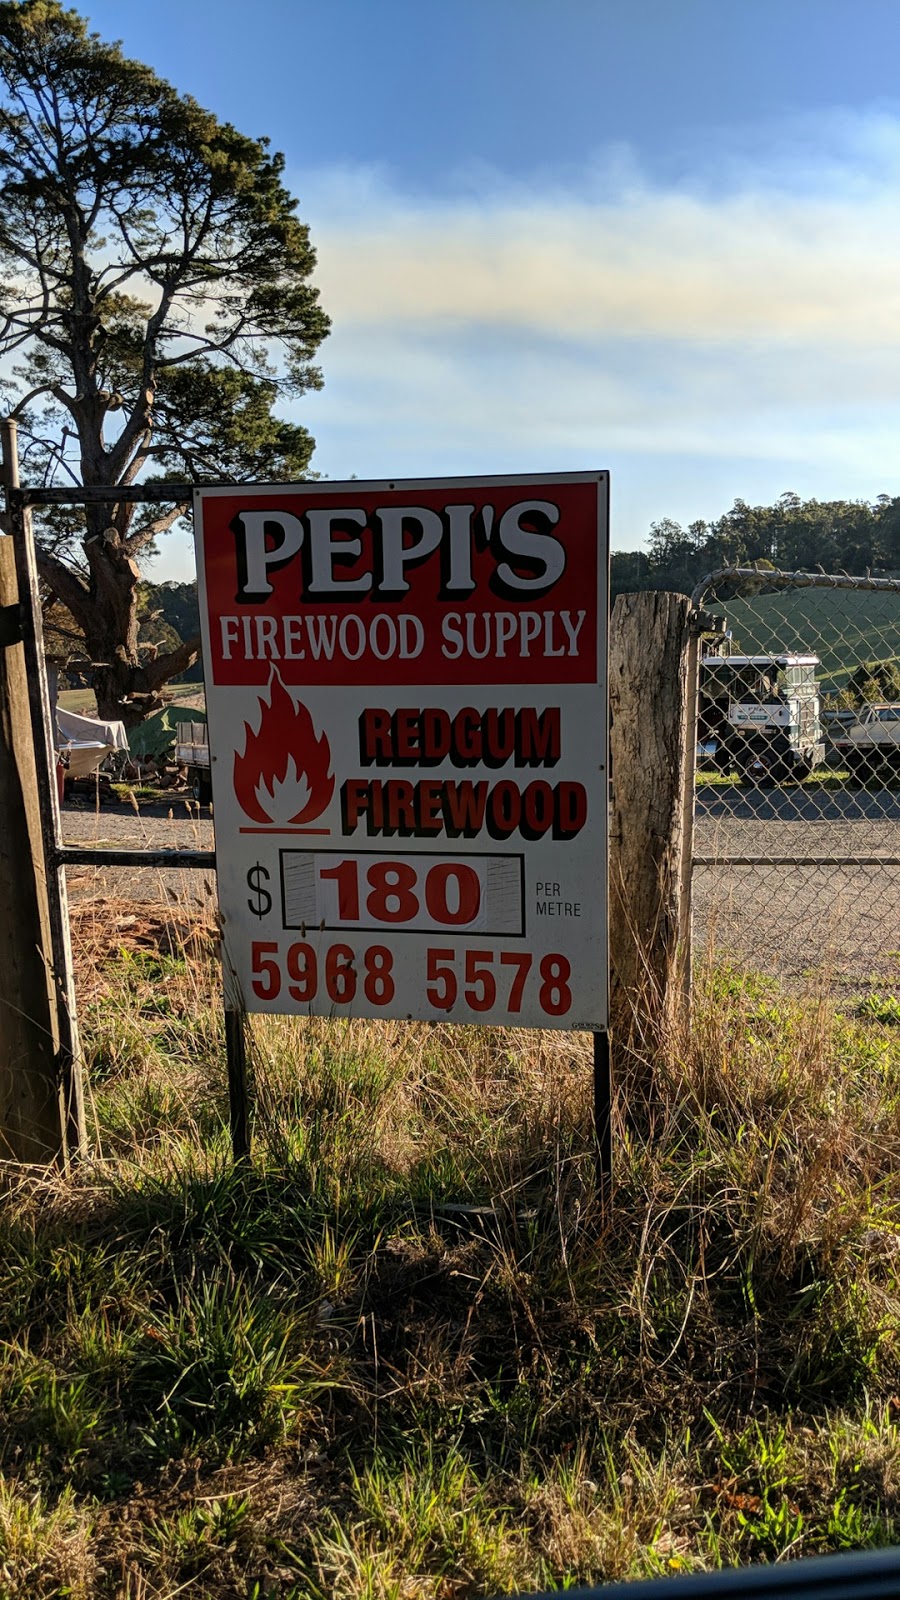 Pepis Firewood Supply | general contractor | 24 Beaconsfield-Emerald Rd, Emerald VIC 3782, Australia | 59685578 OR +61 59685578